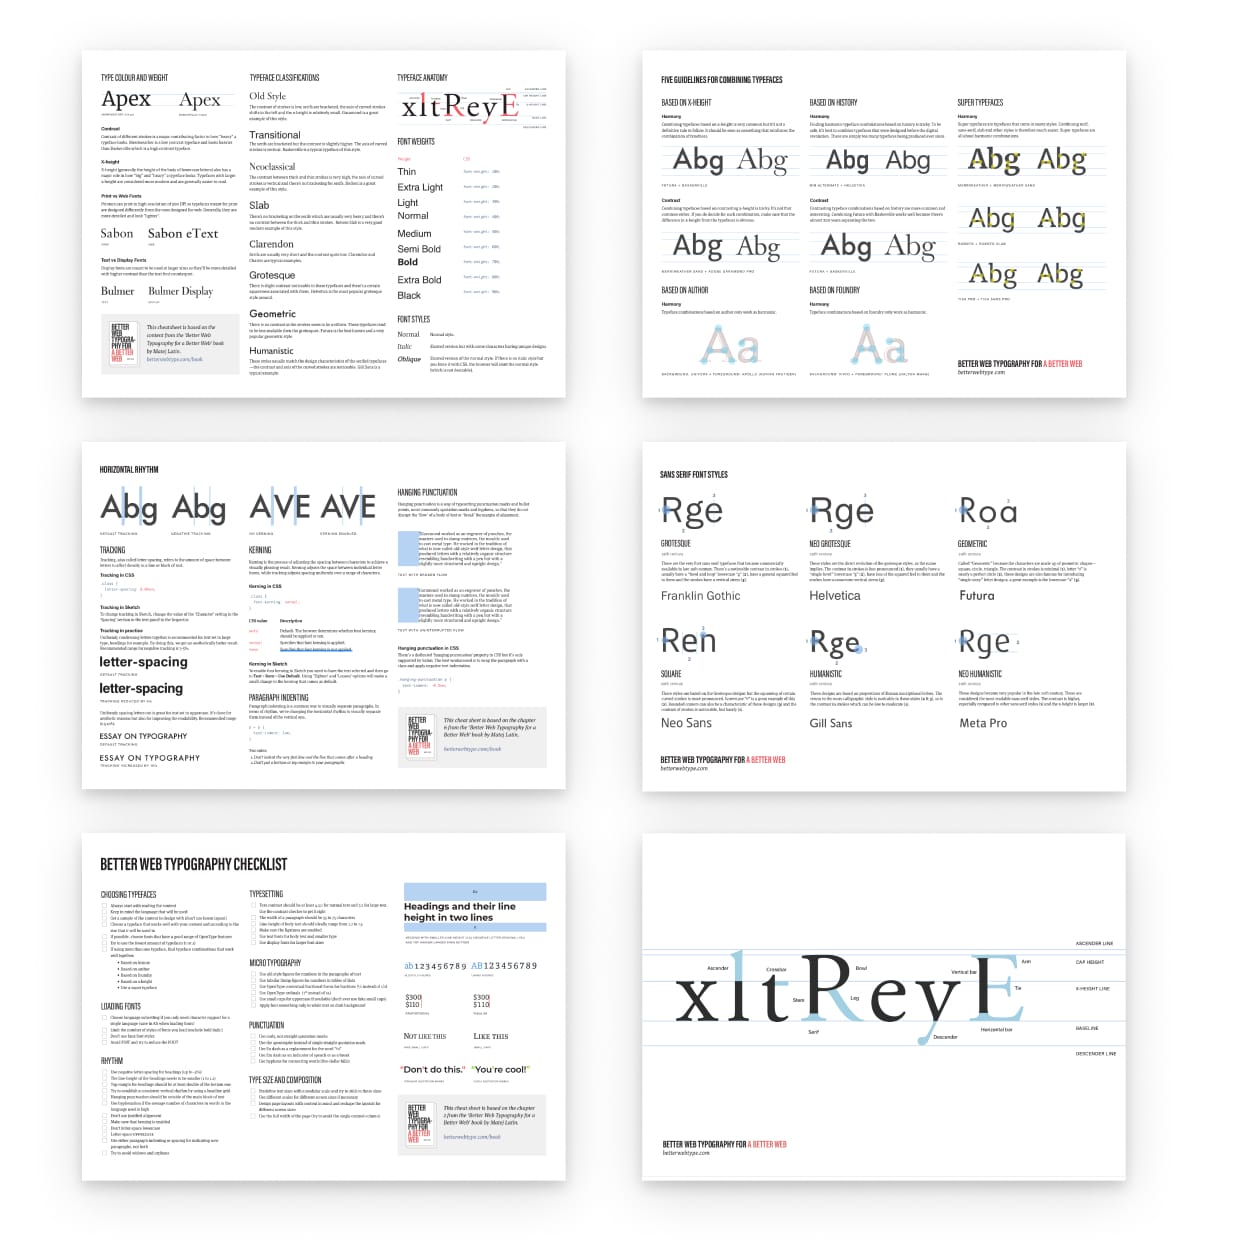 Web typography cheat sheets